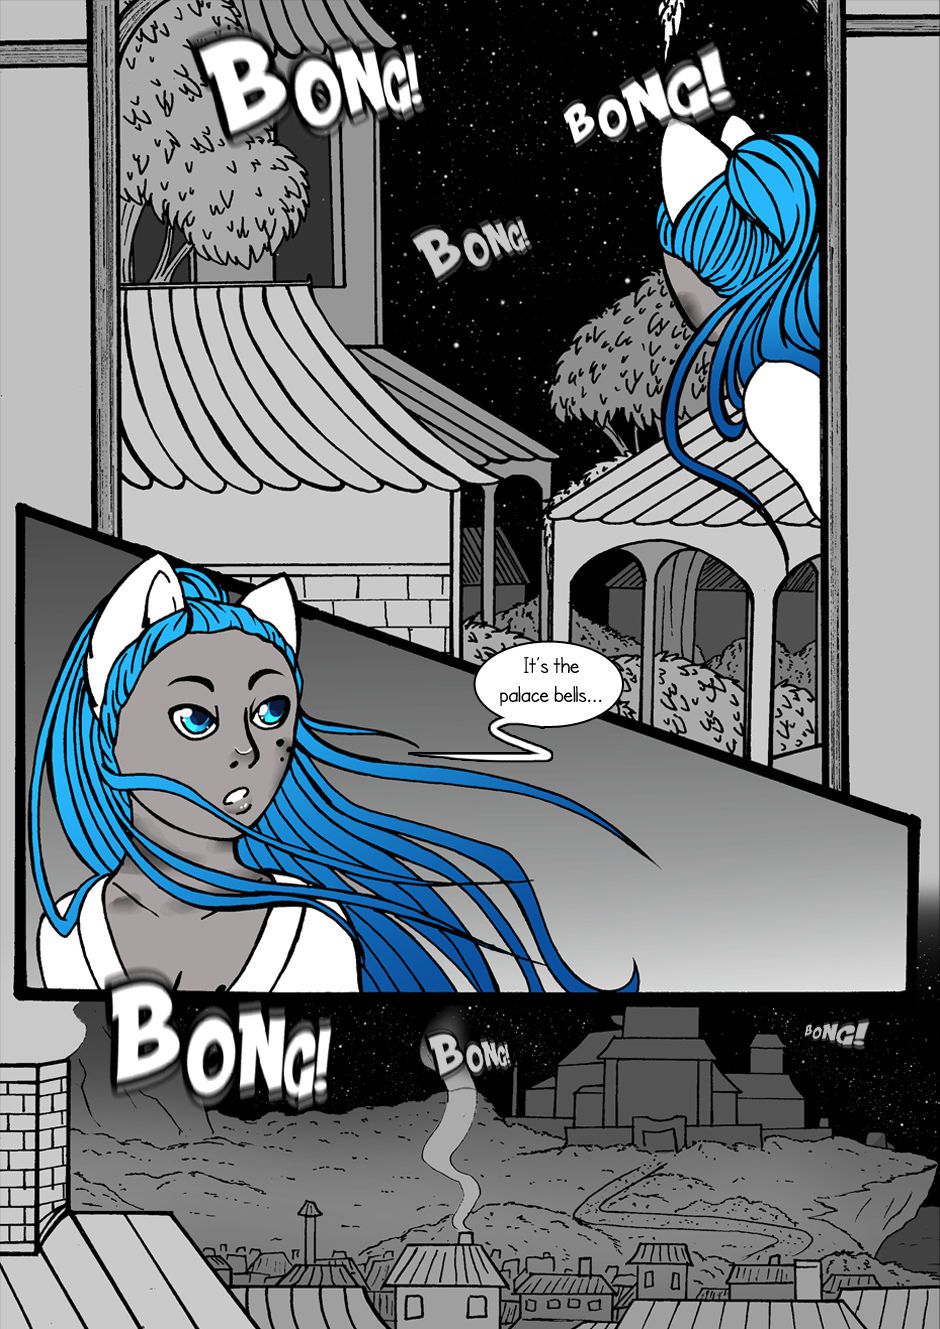 [Jeny-jen94]Between Kings and Queens[ongoing] 11